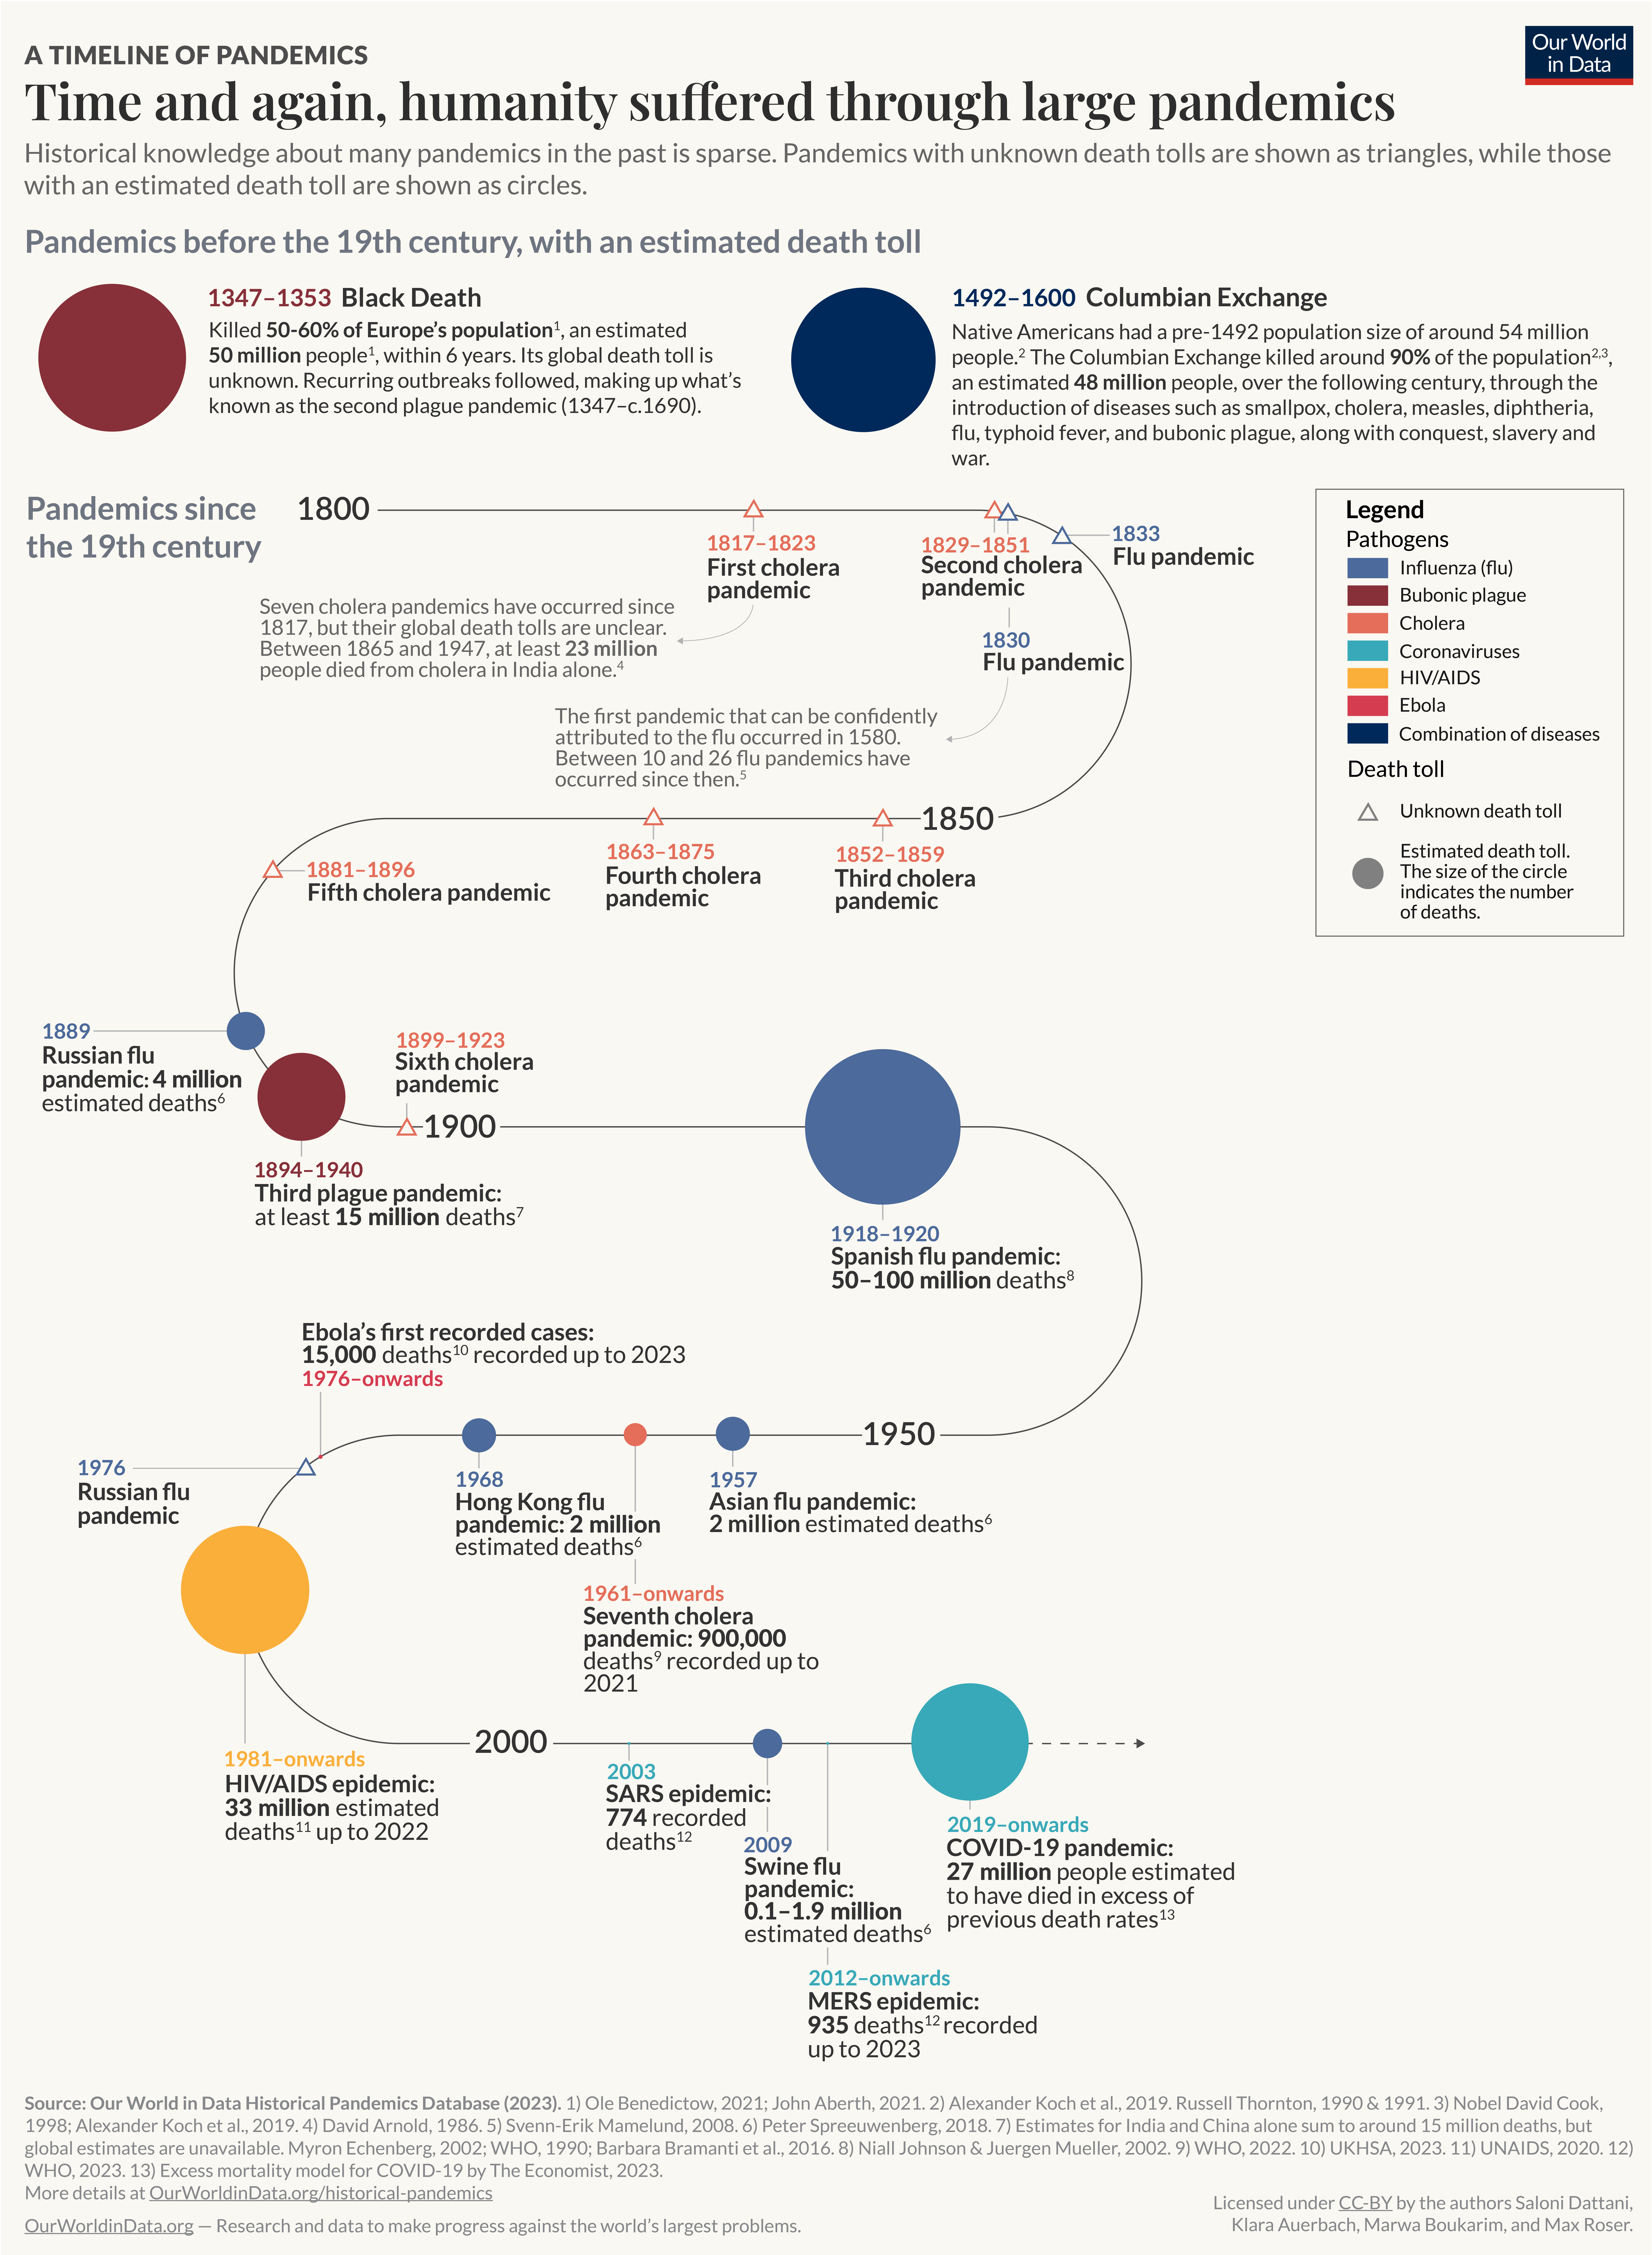 Estimates of death tolls from different pandemics in history, compiled by Our World in Data.